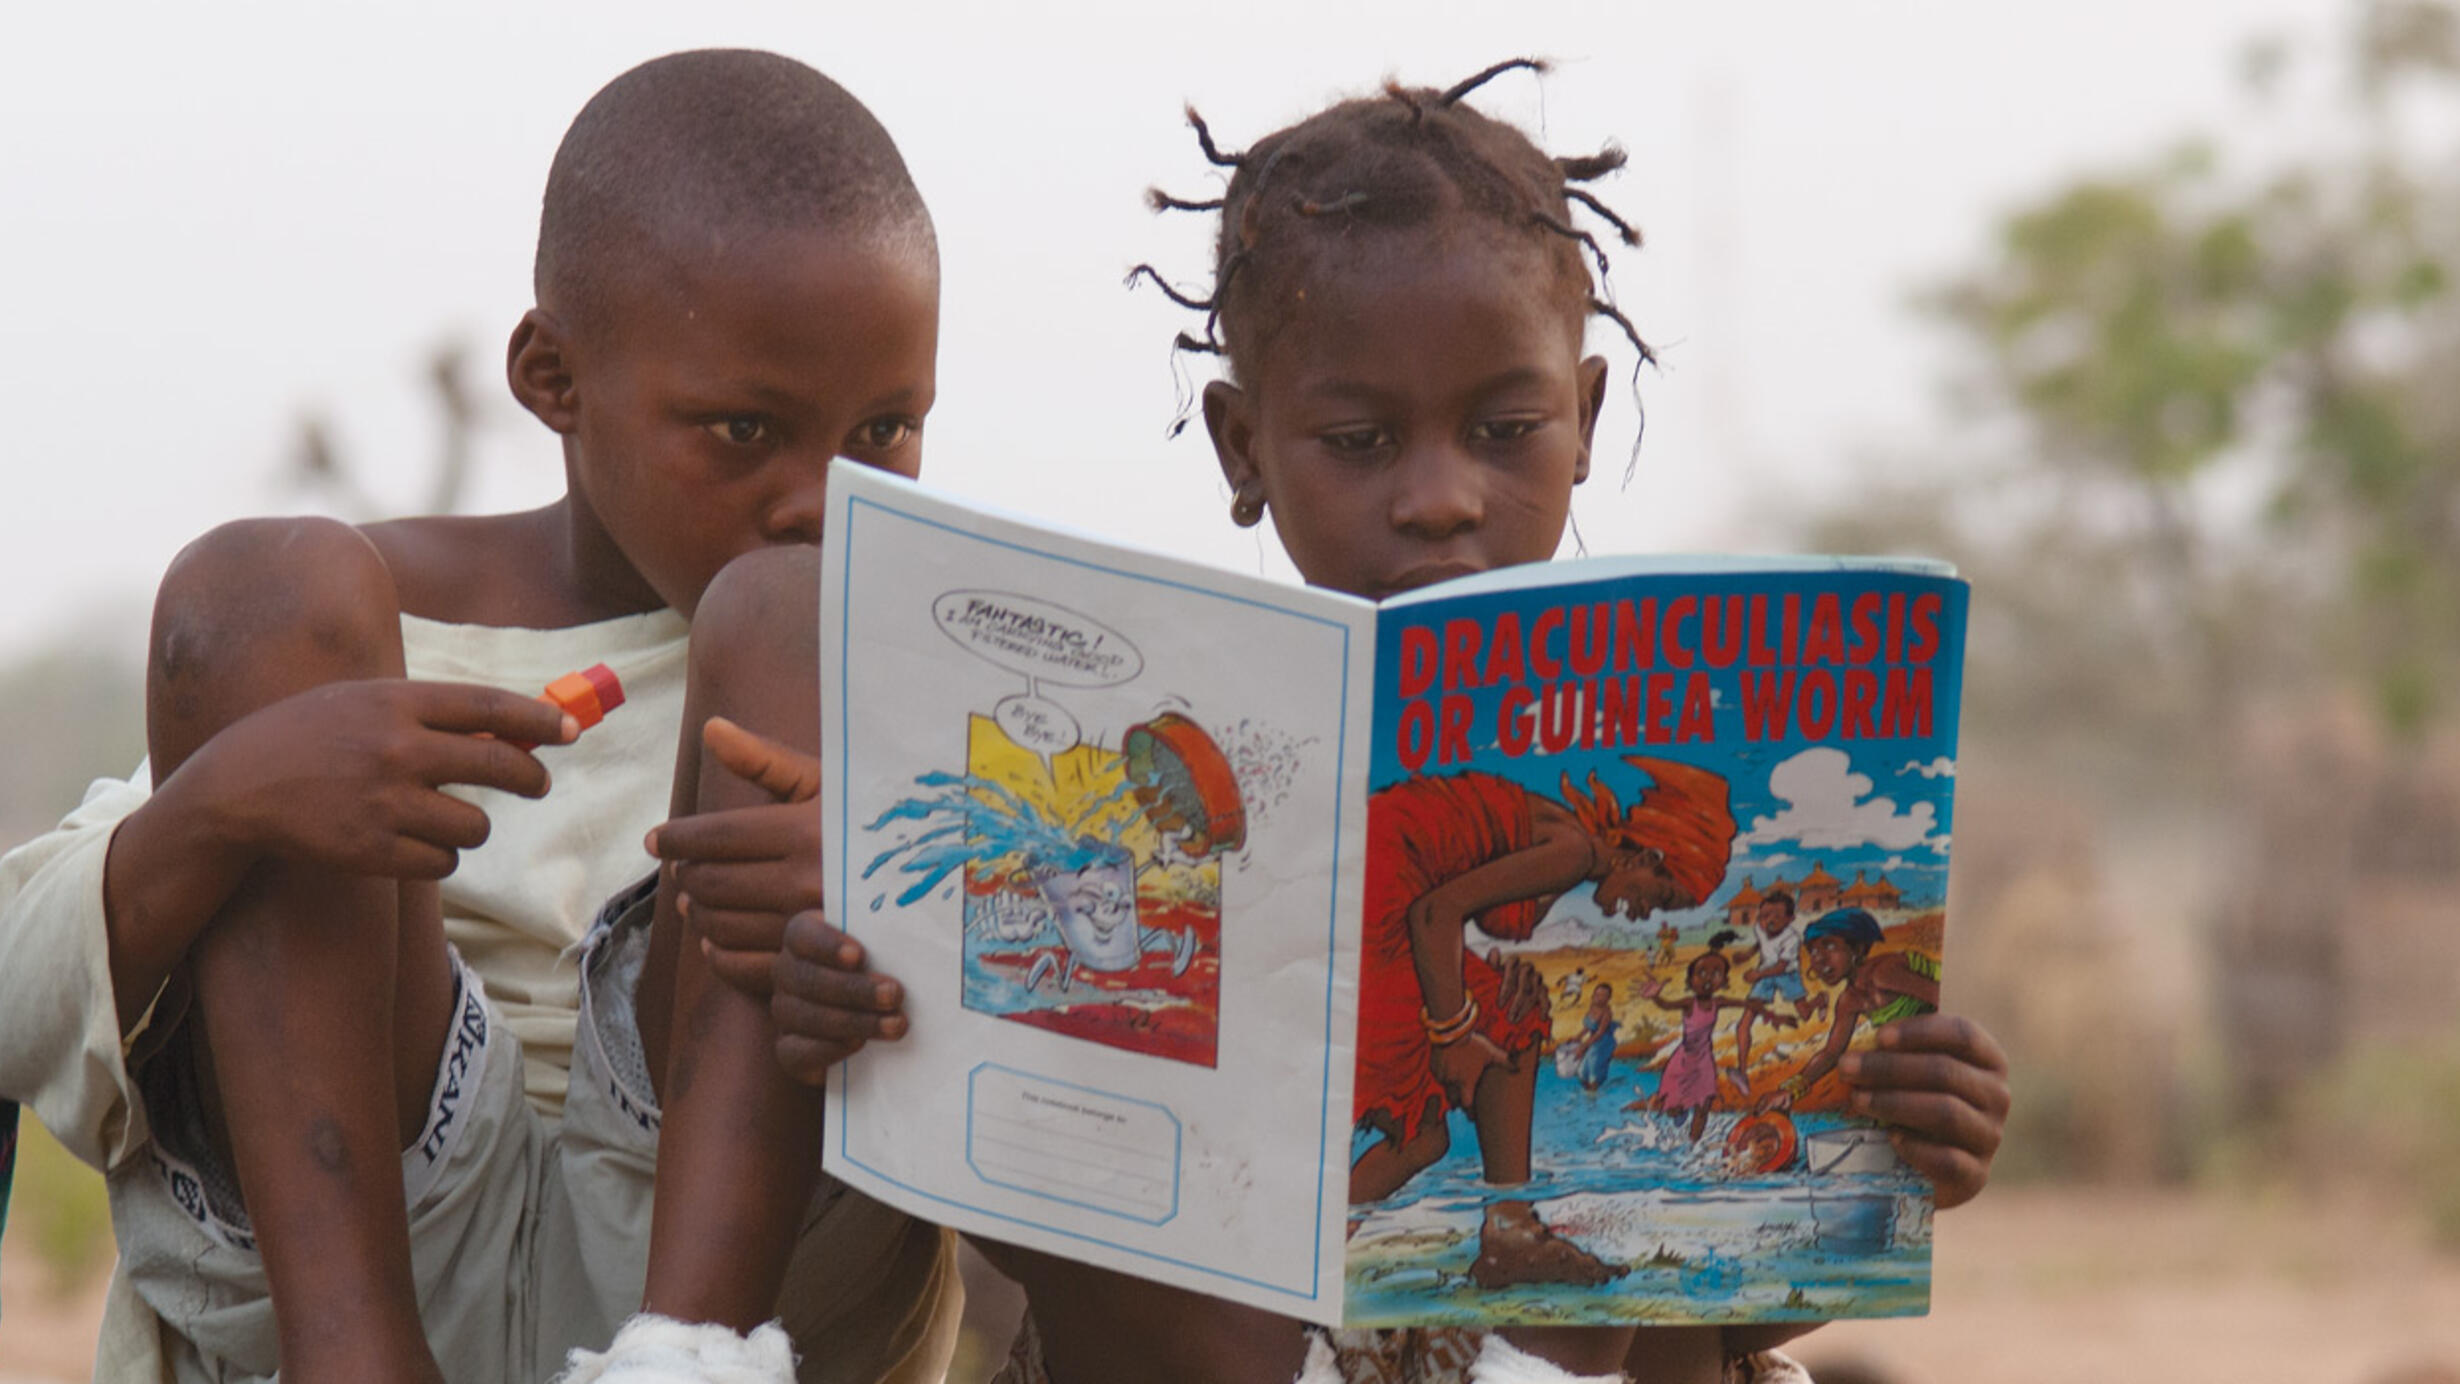 Two children crouch and read a comic book called "Dracunculiasis Or Guinea Worm" with a brightly illustrated cover.